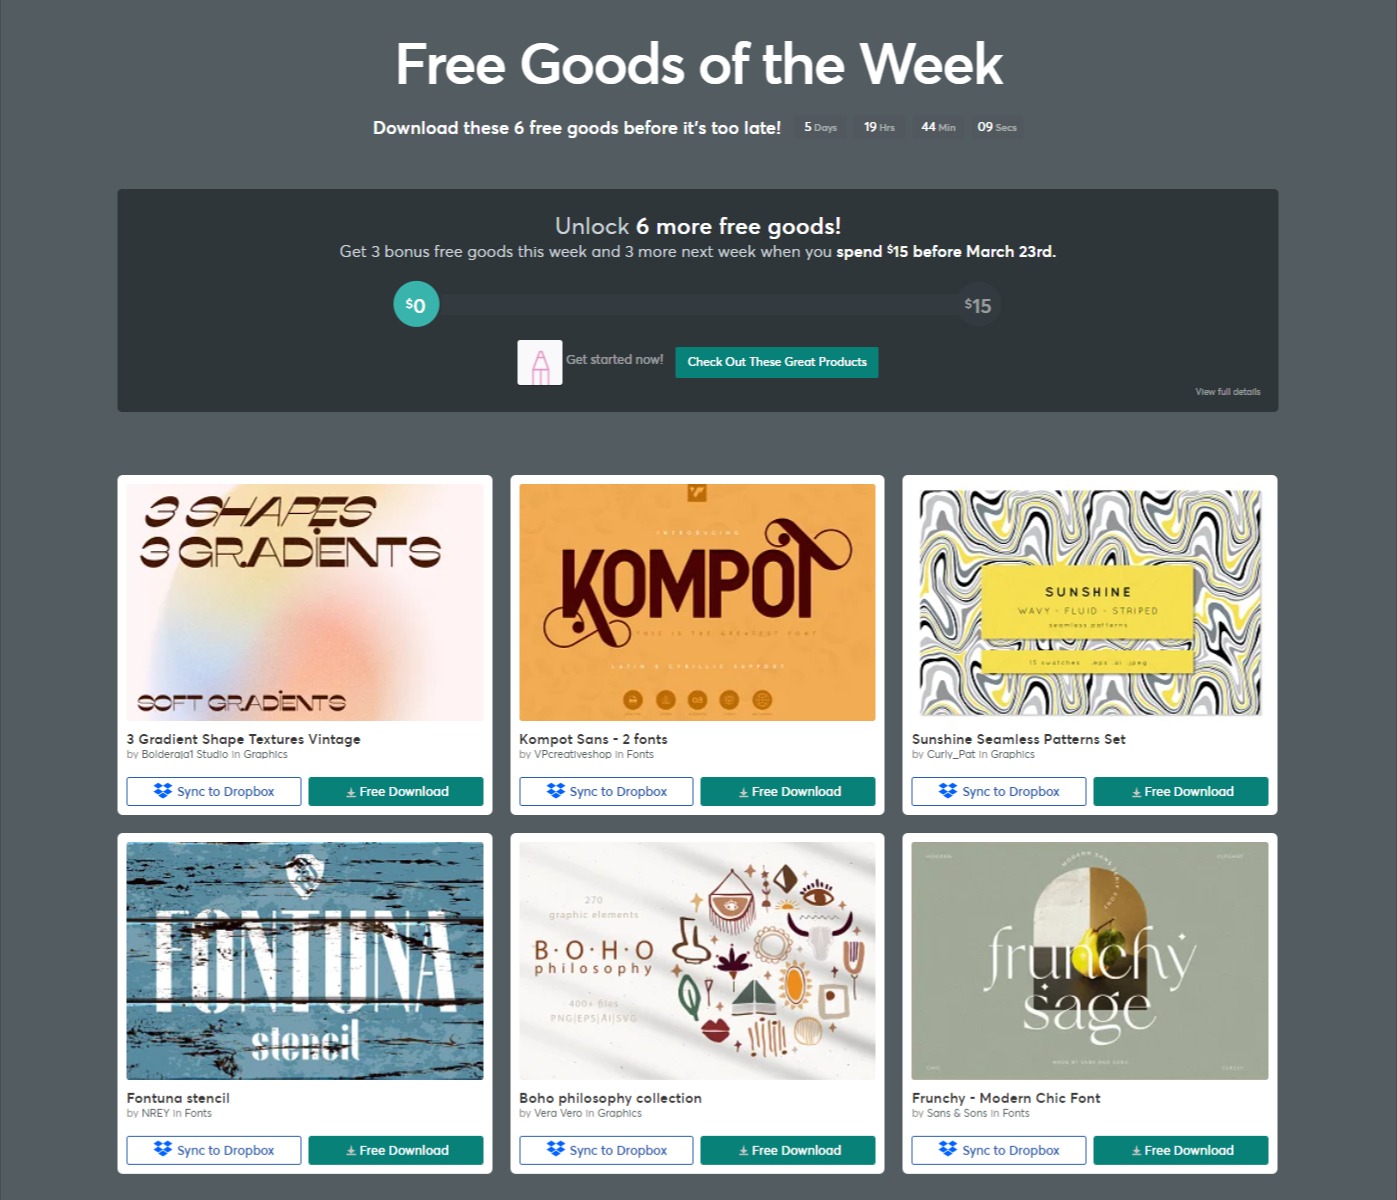 Free Goods of the Week